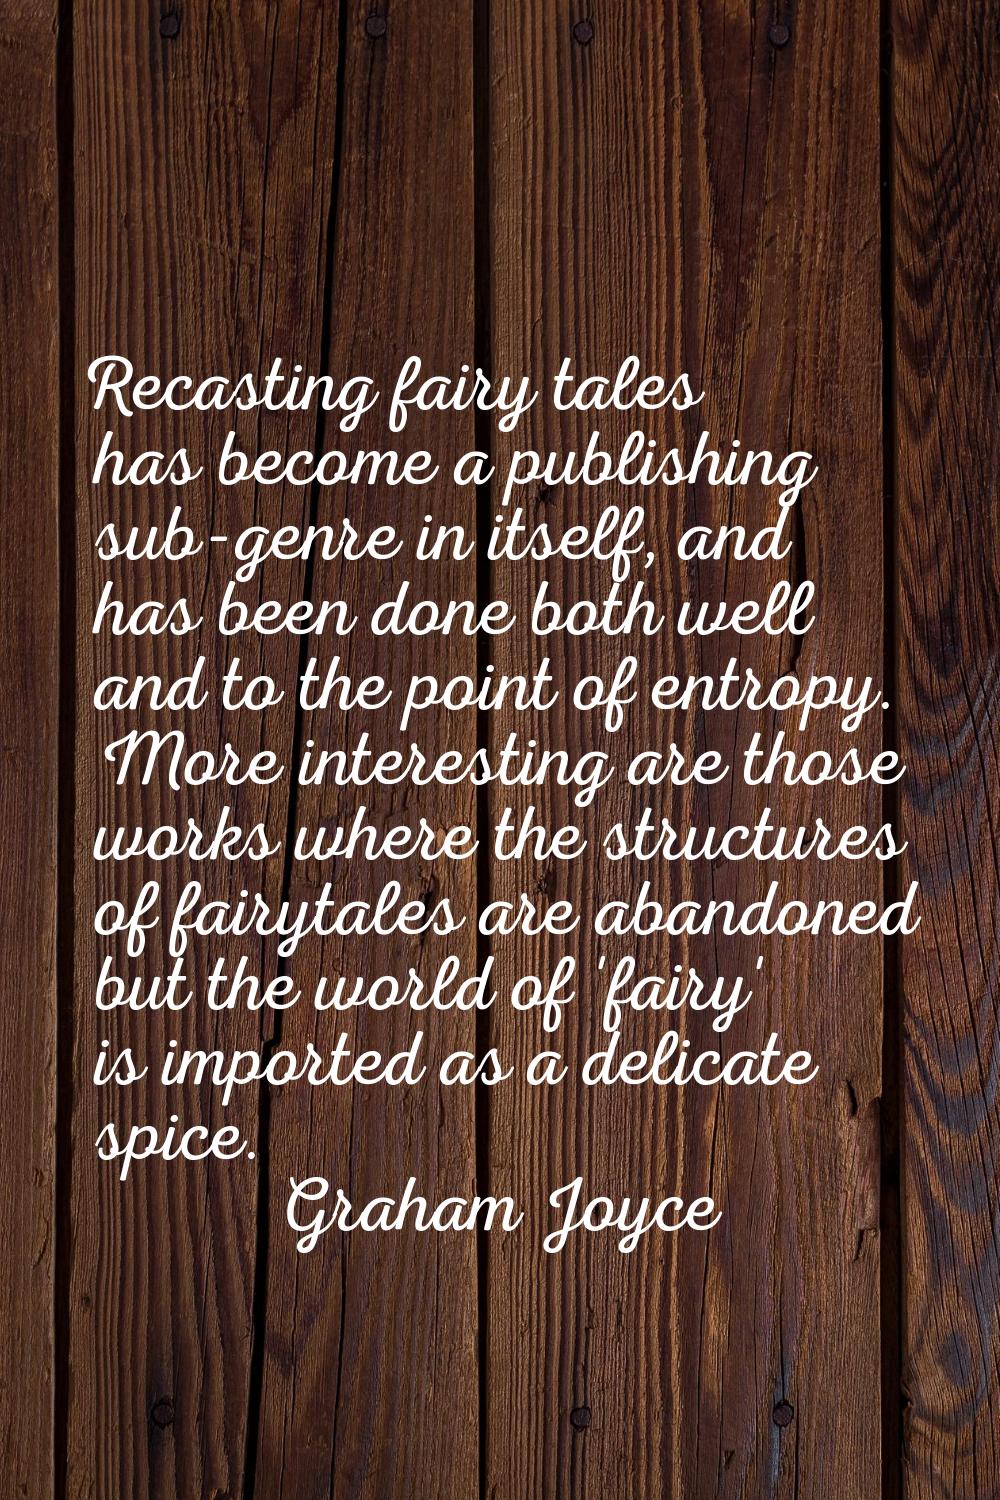 Recasting fairy tales has become a publishing sub-genre in itself, and has been done both well and 